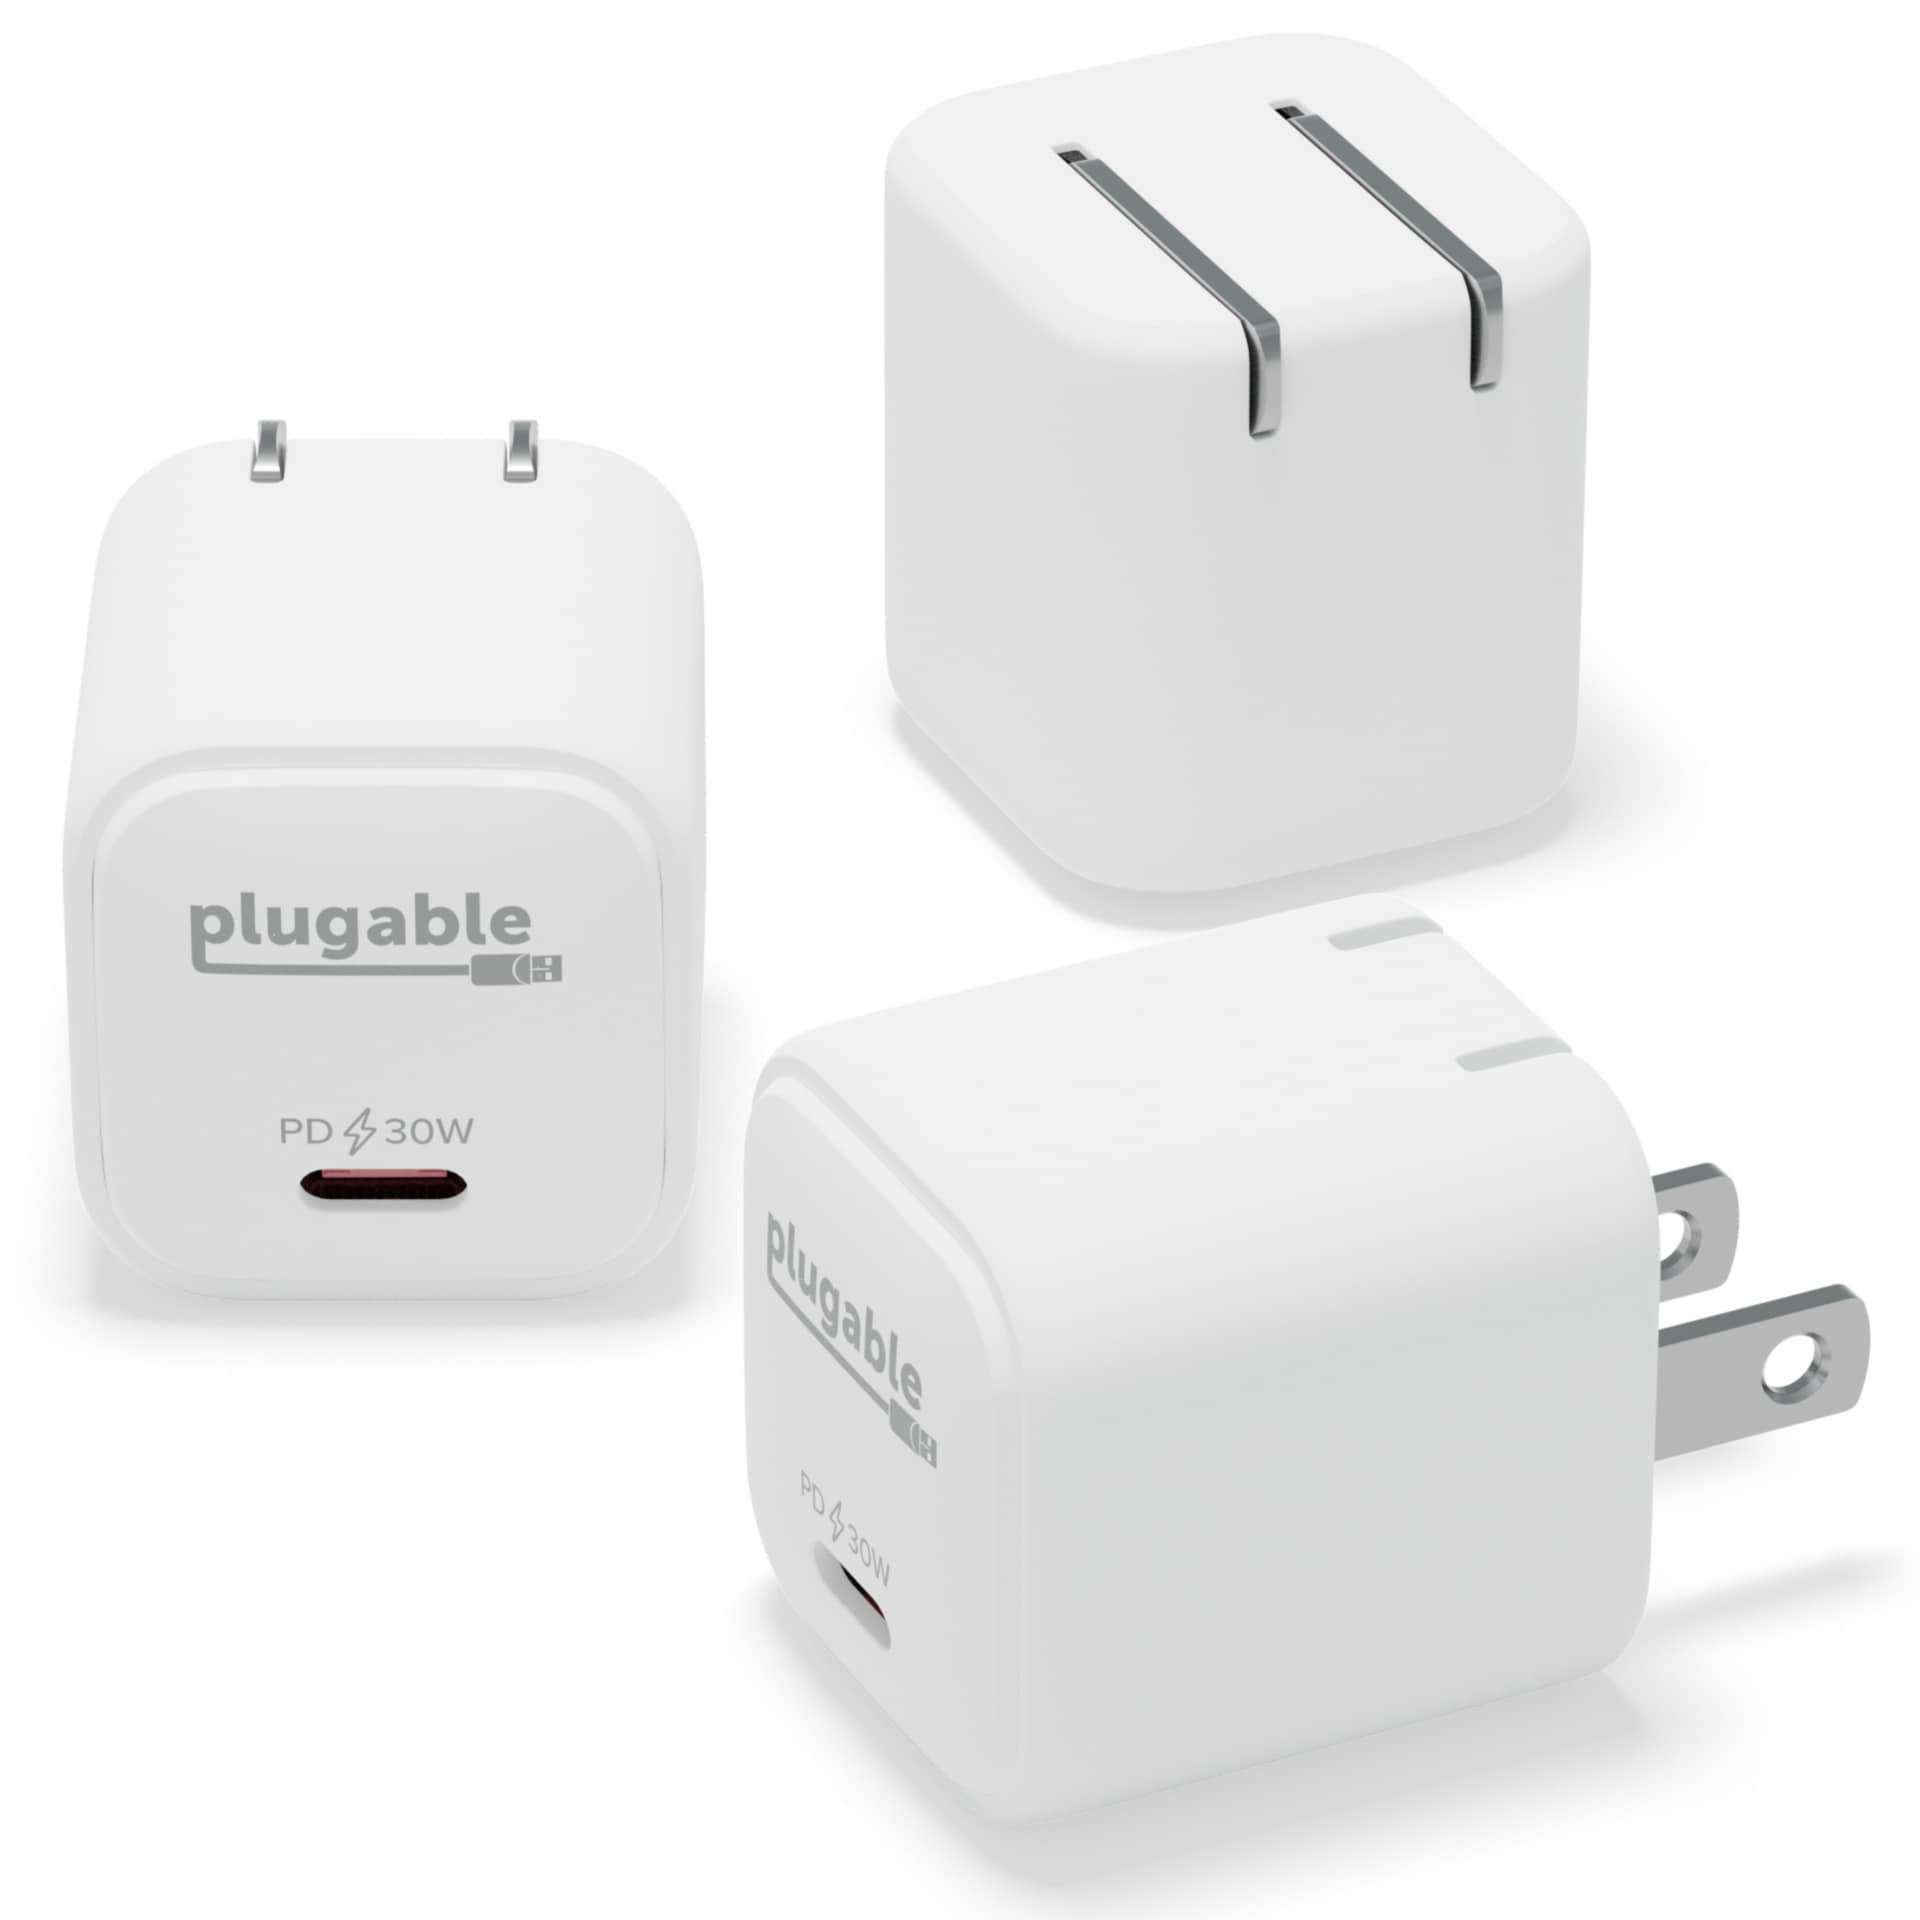 Plugable GaN USB C Charger Block, 30W Portable Fast Charger White 3 Pack